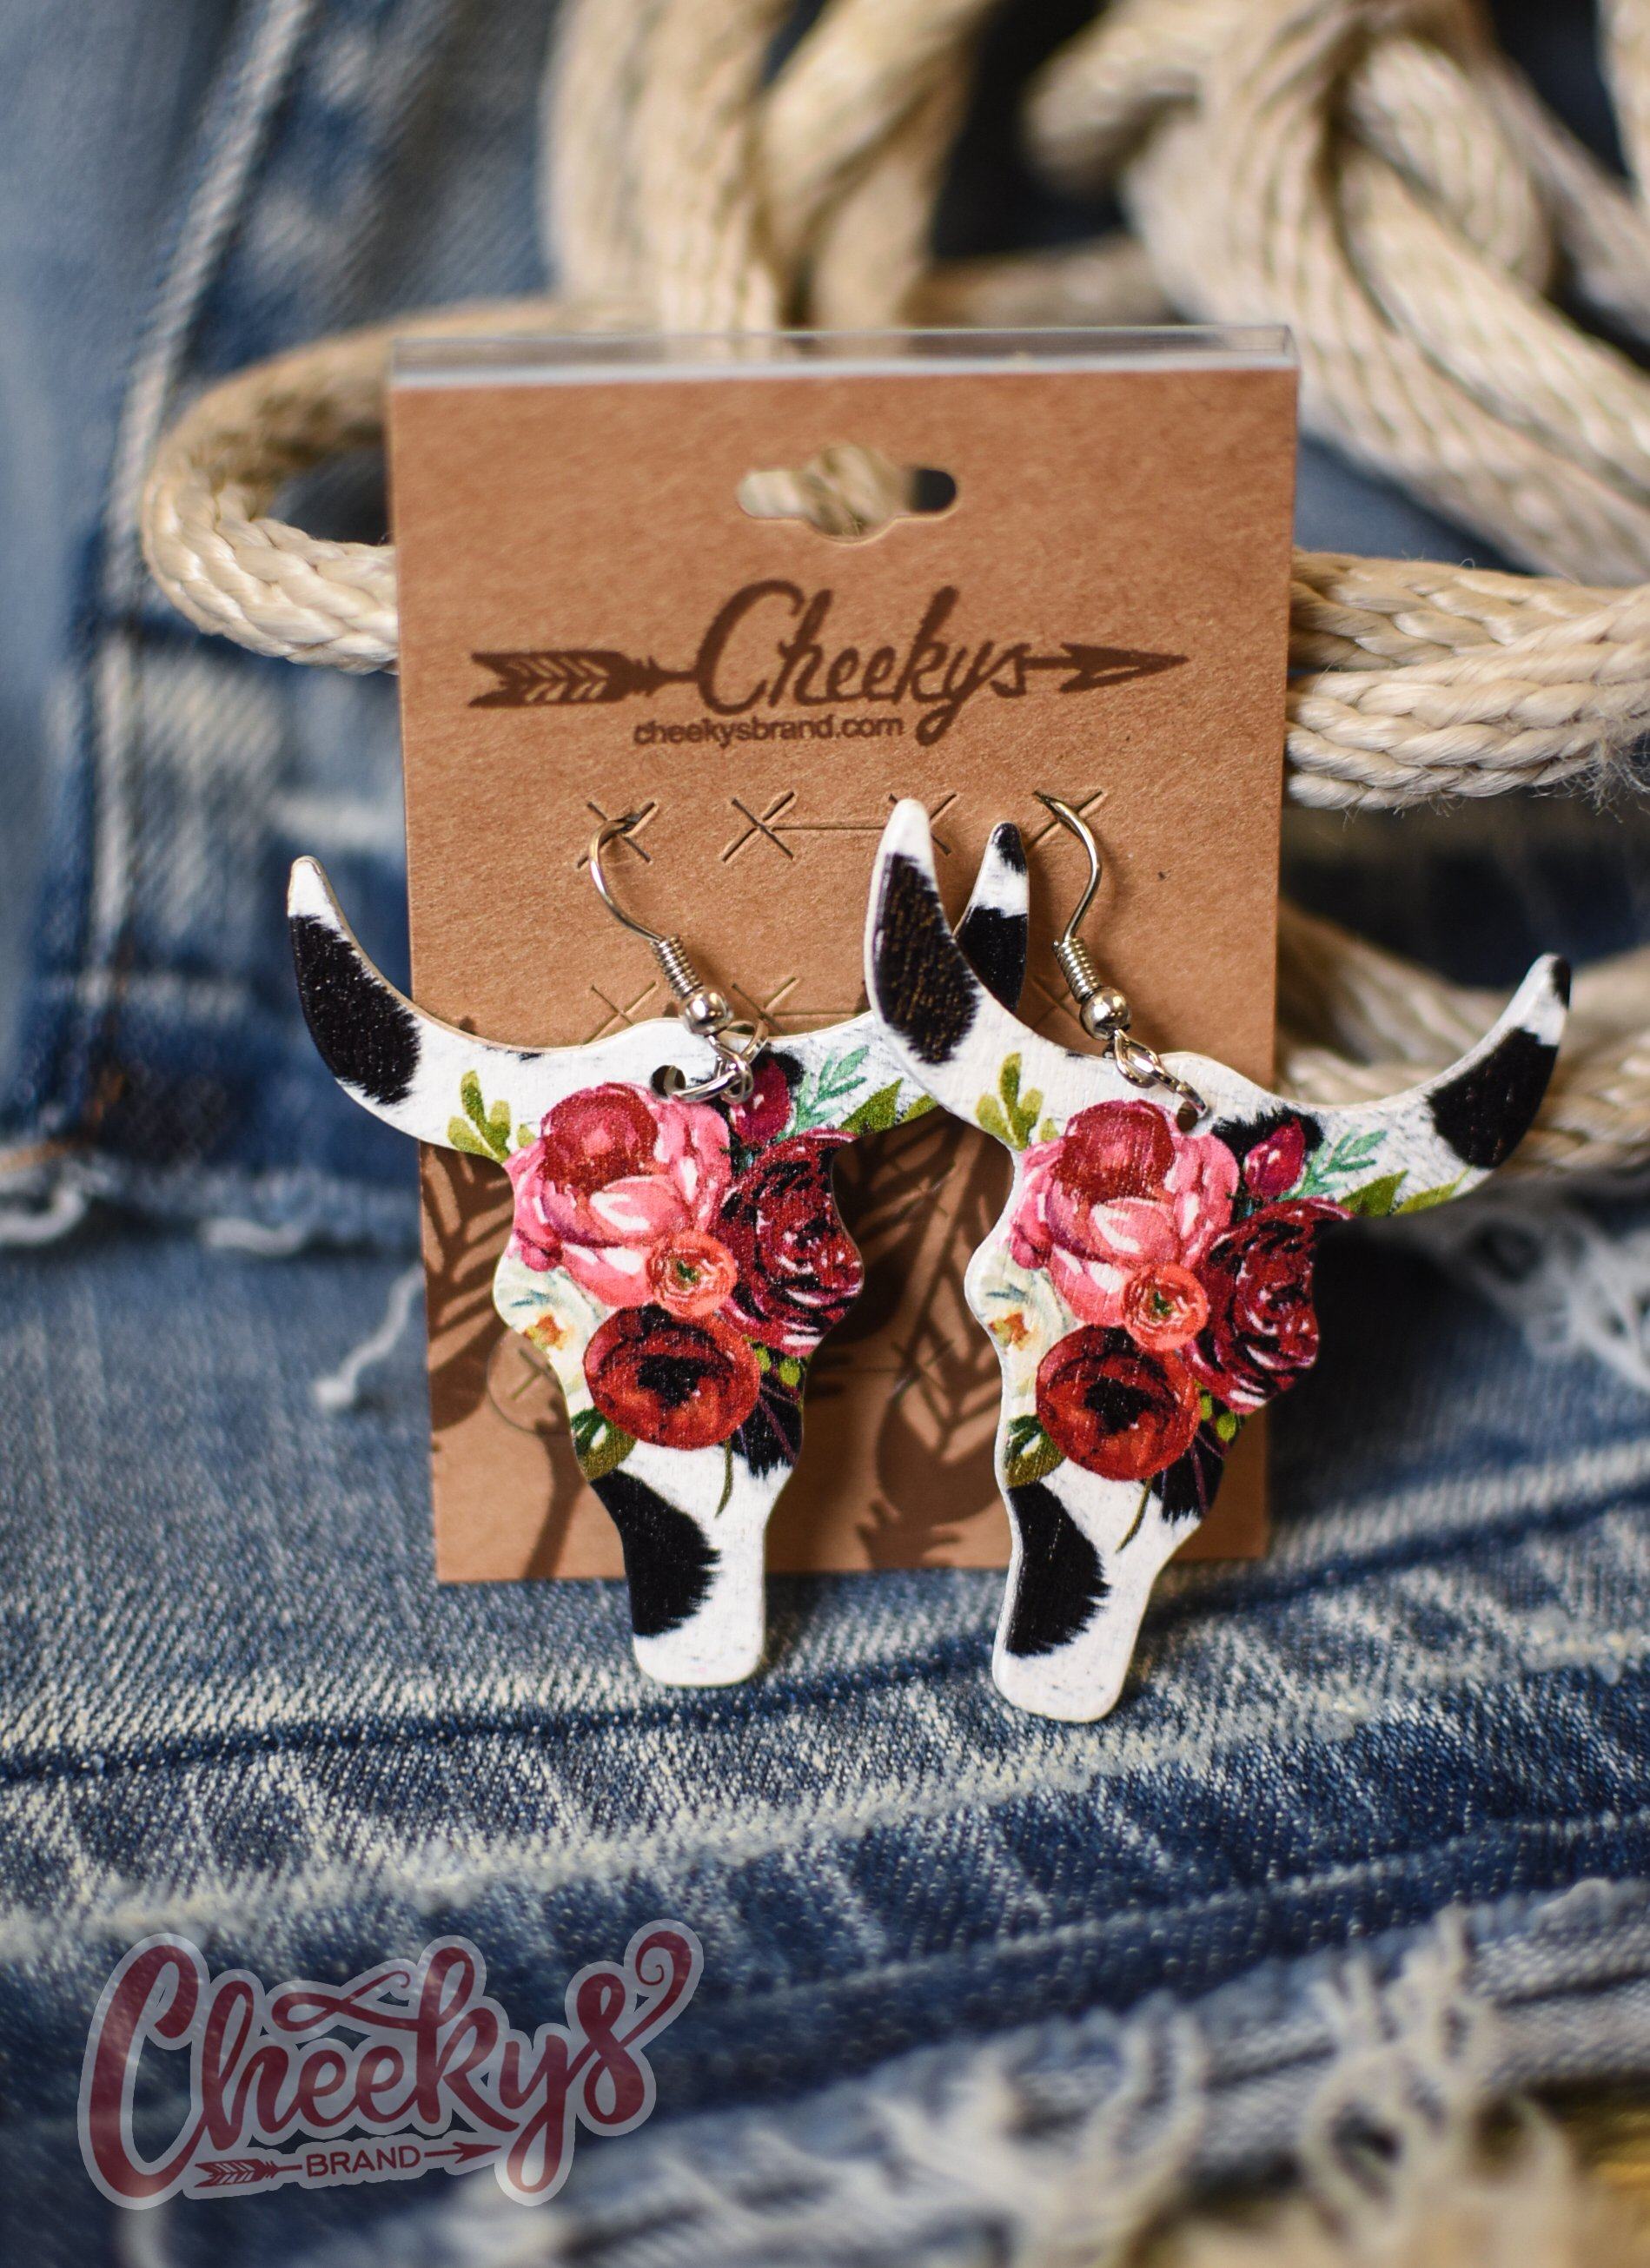 The Bessy Floral Cow Print Bull Skull Earrings Accessories 18 